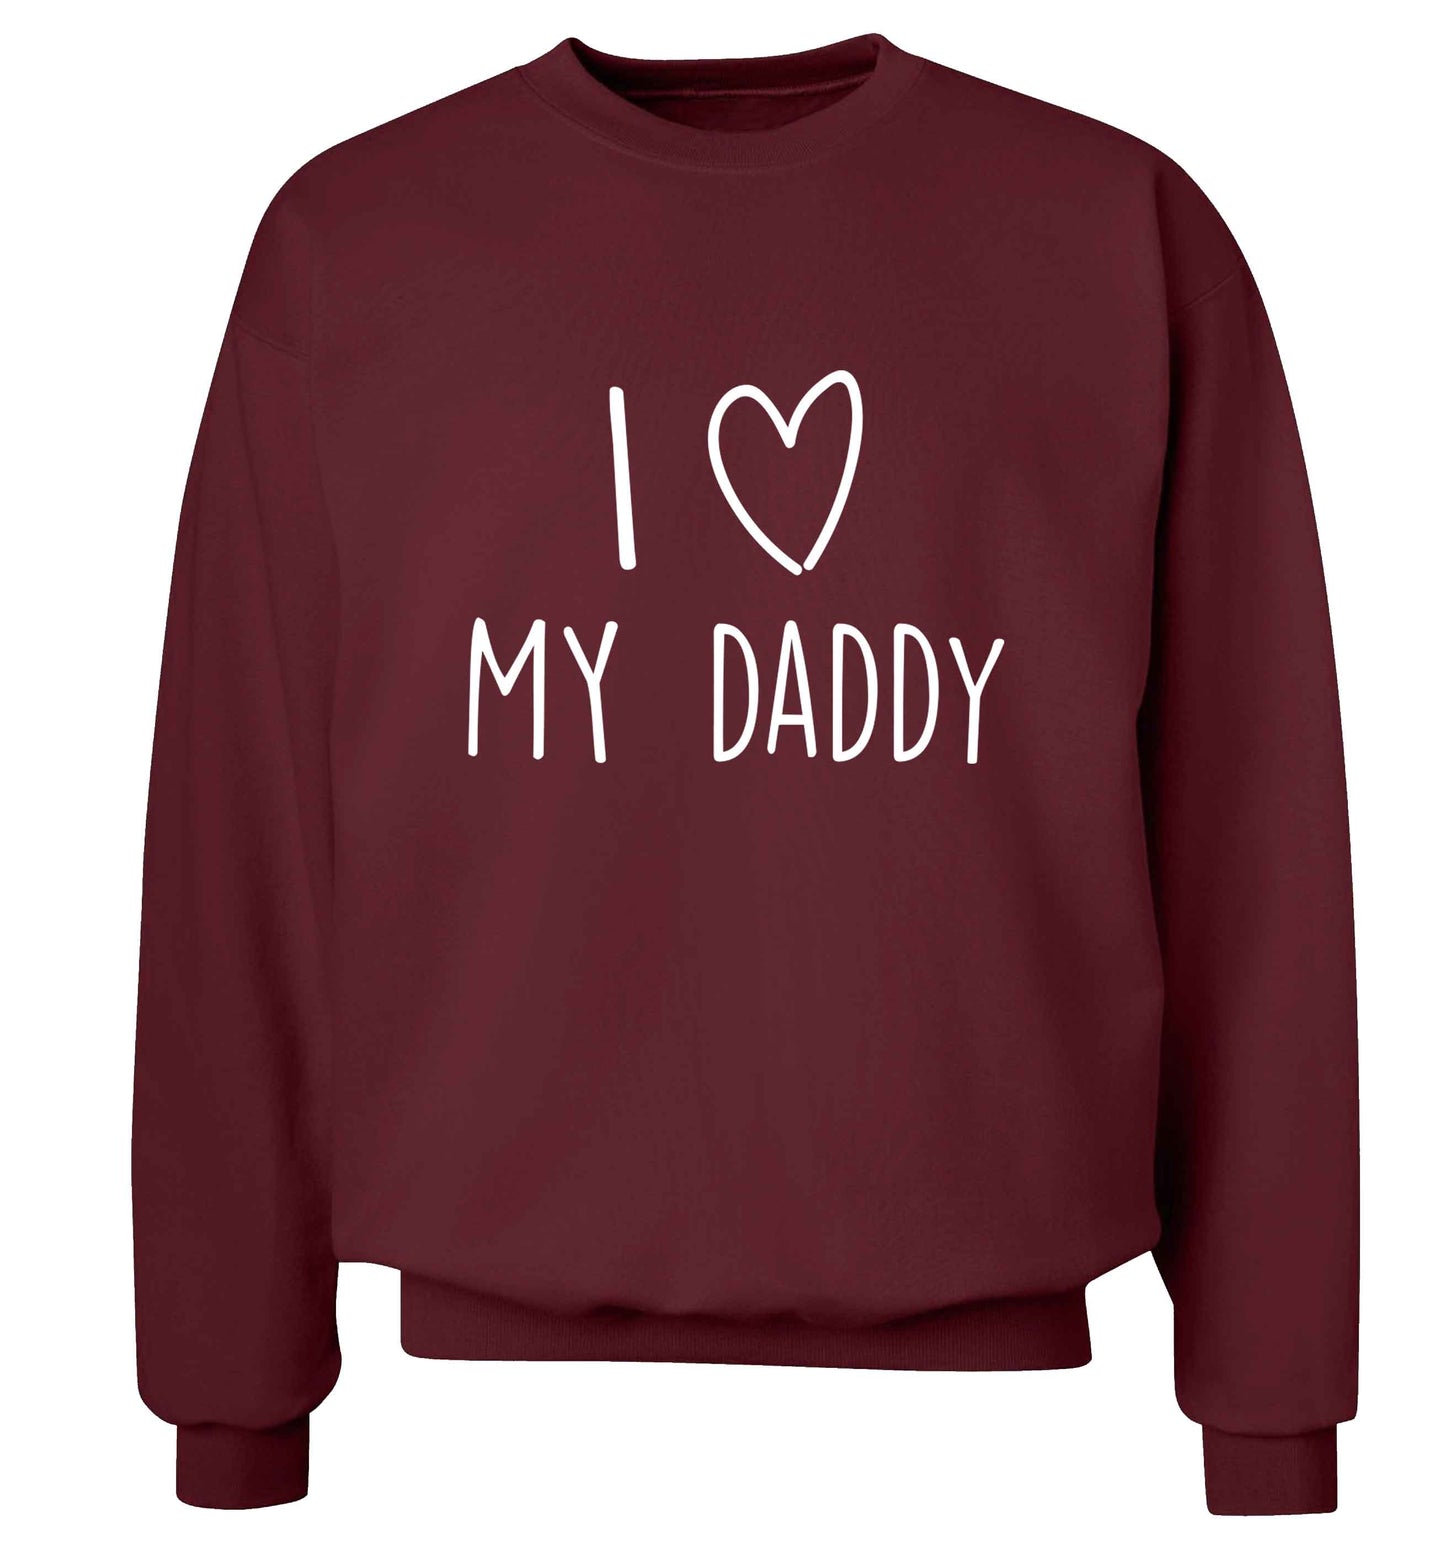 I love my daddy adult's unisex maroon sweater 2XL